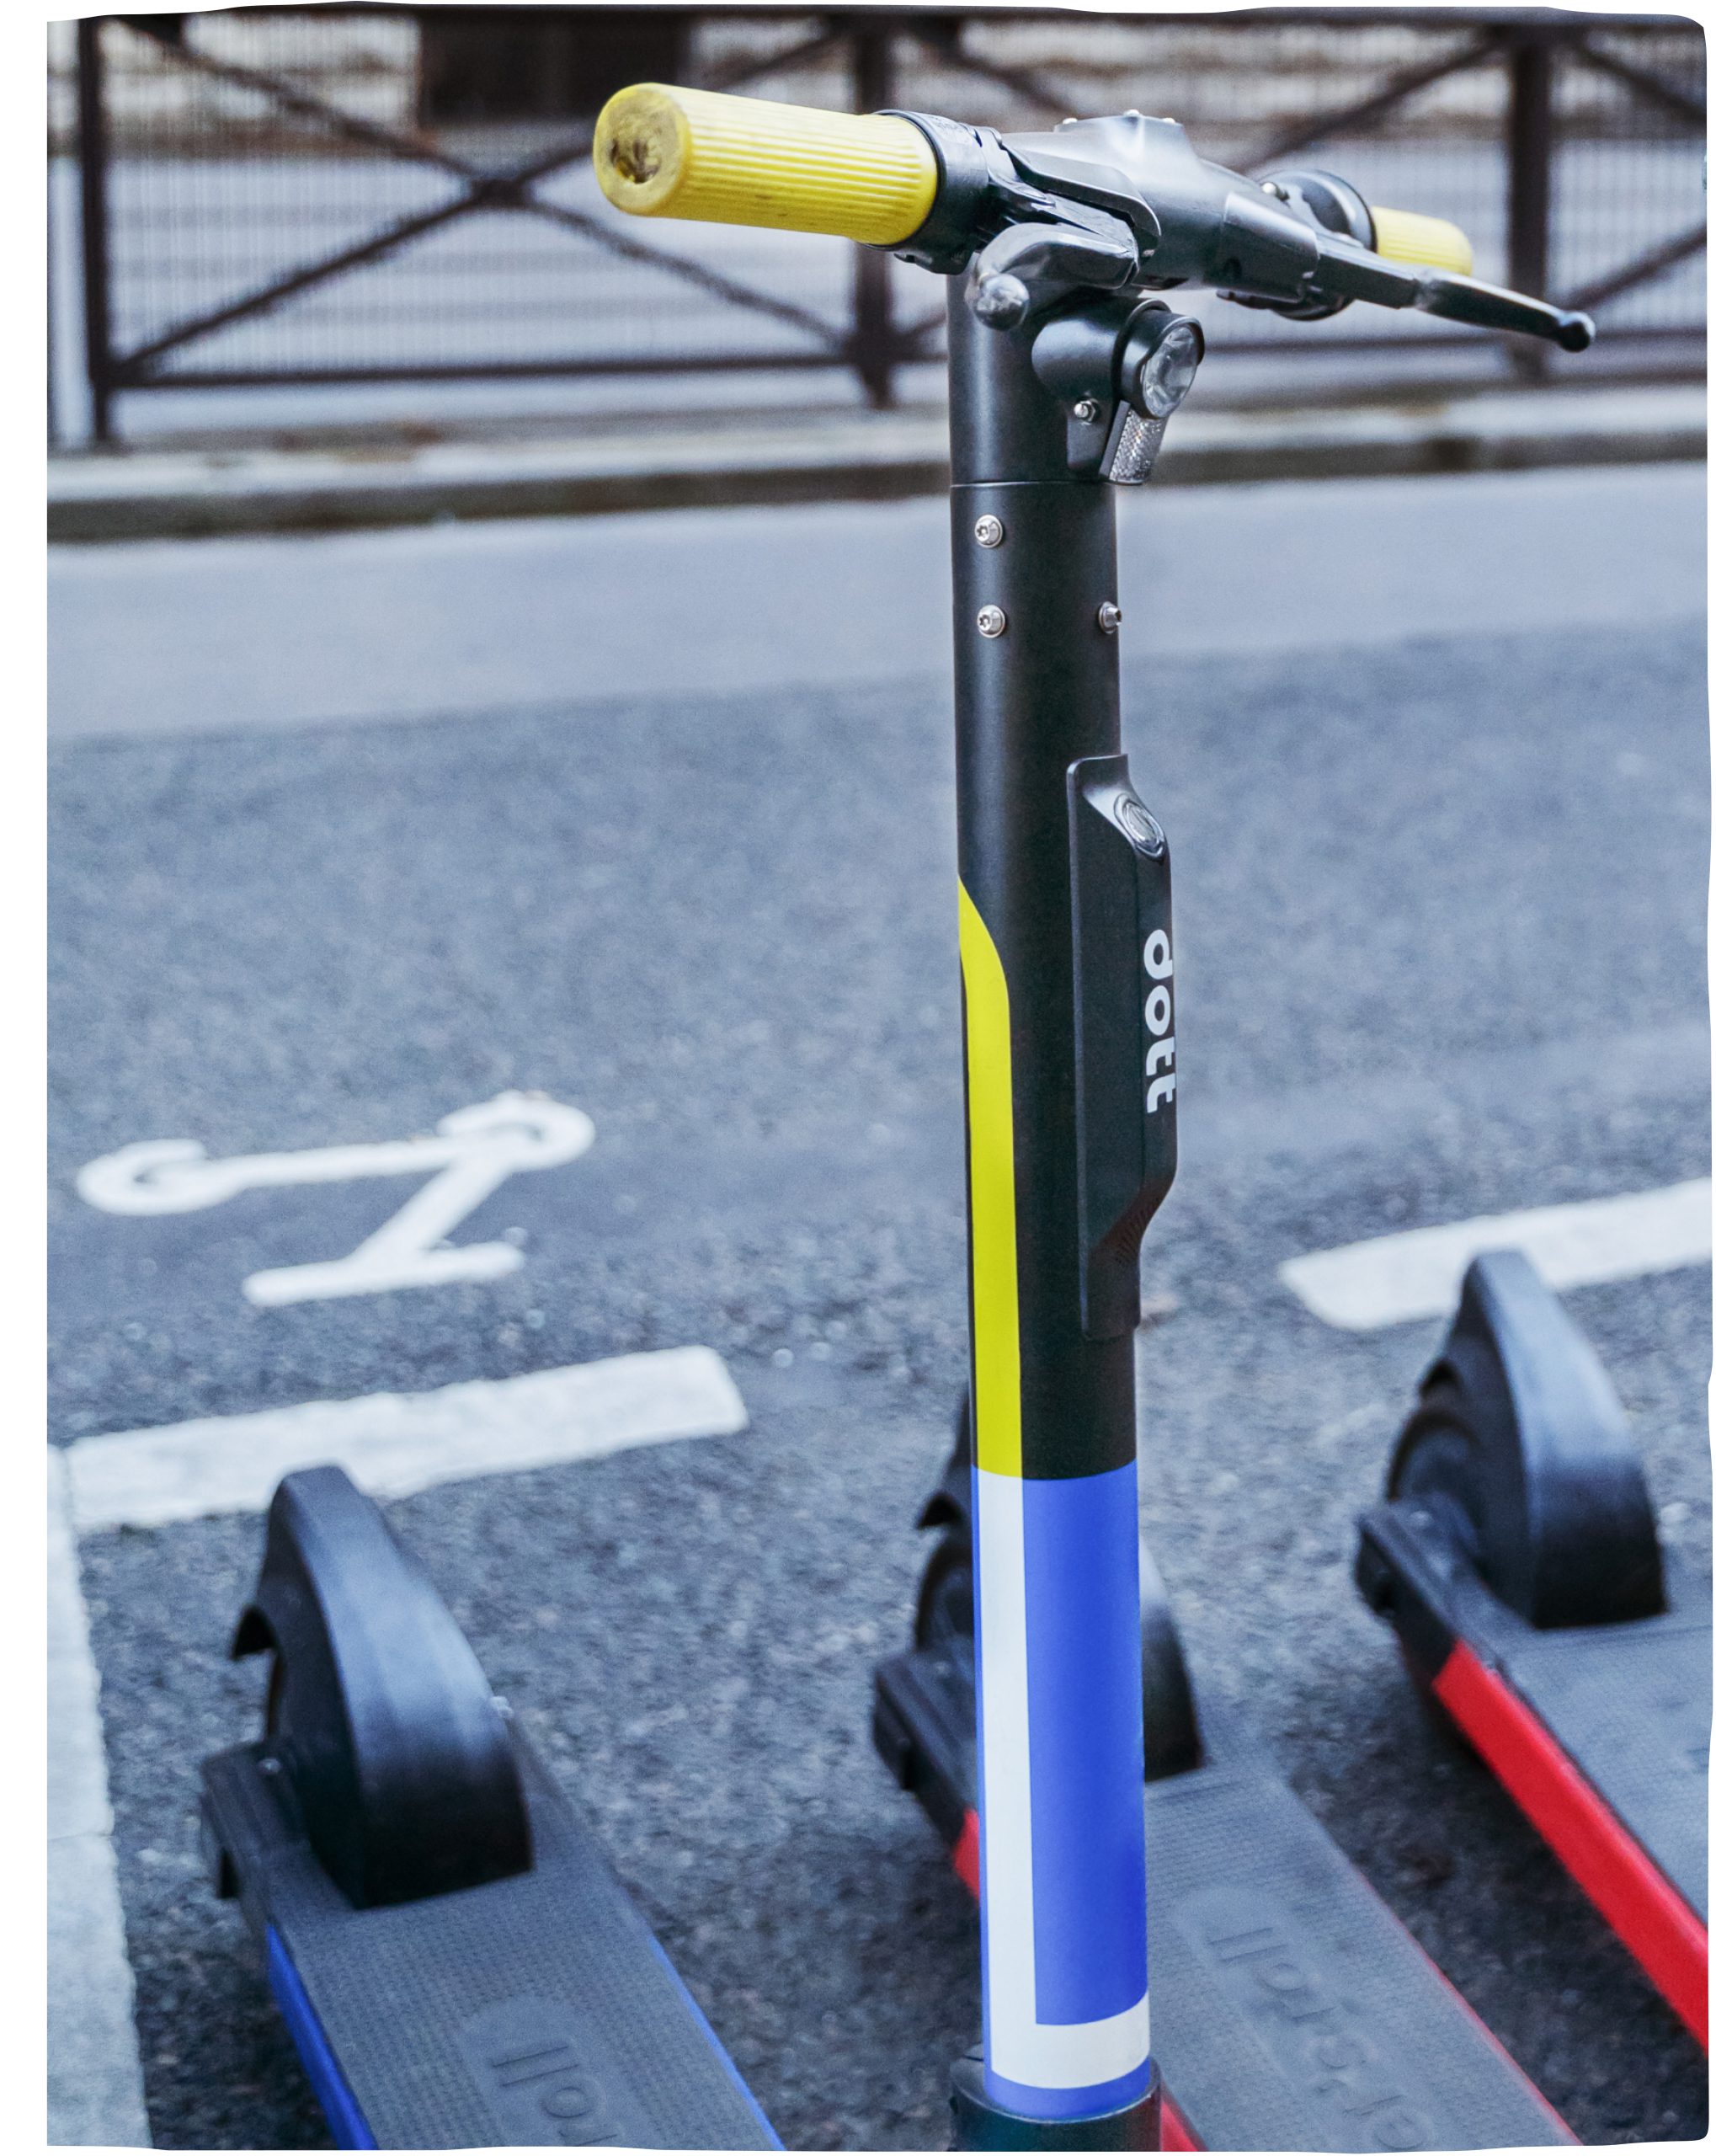 An image of a Dott e-scooter is in the middle of the frame. In the bottom right of the picture, two other Dott e-scooters are visible.